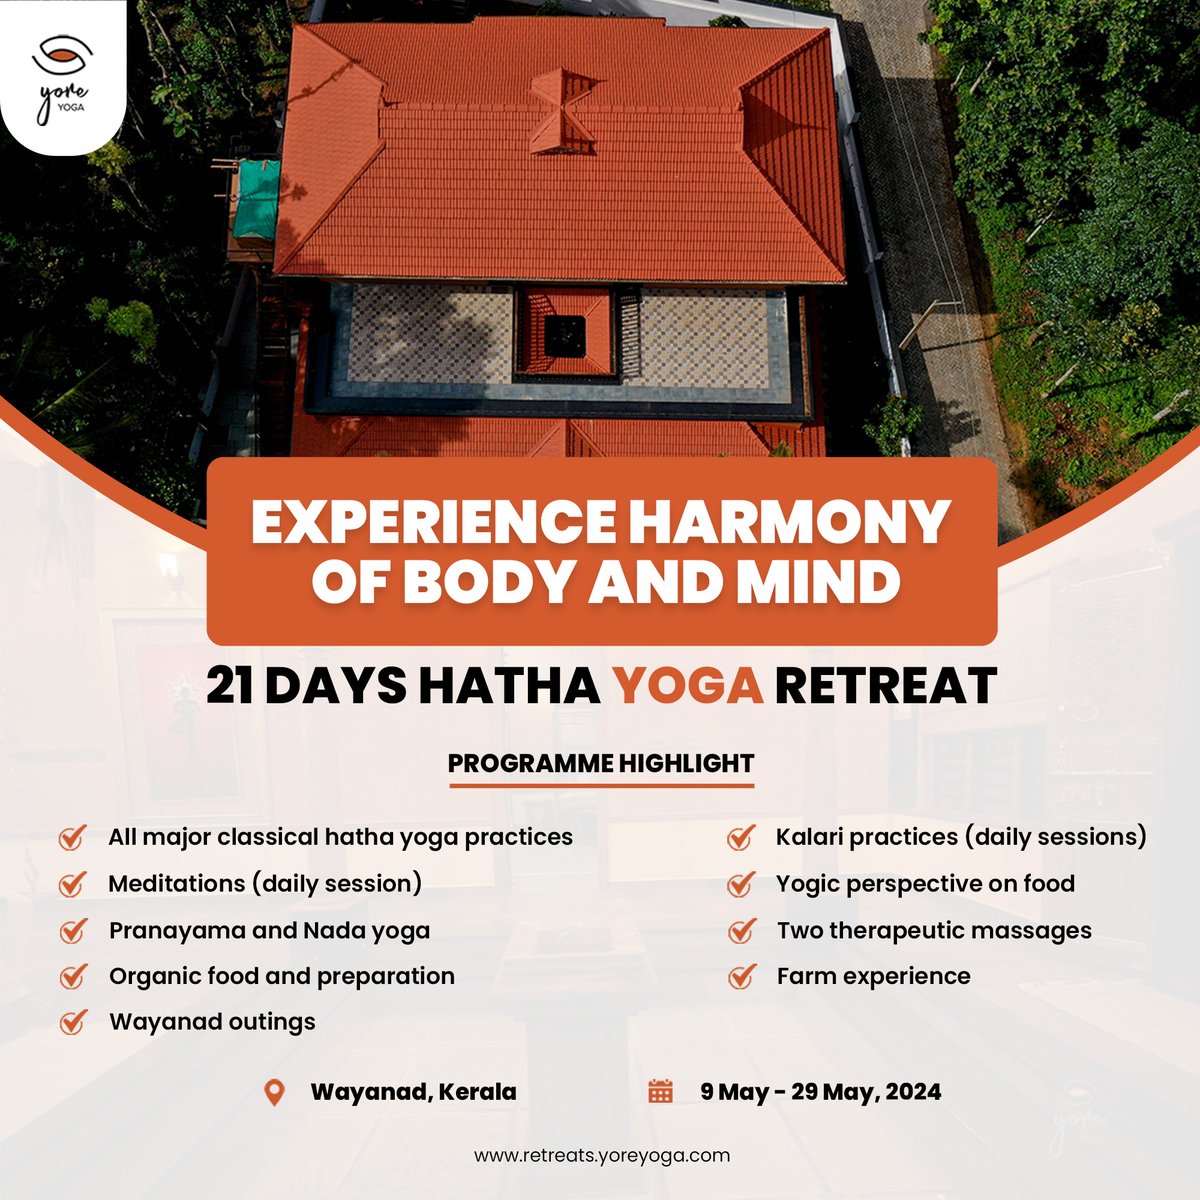 21-Day Hatha Yoga Retreat with Yore Yoga! 🧘‍♀️✨

Join us from May 9th to May 29th and embark on a holistic experience!

Visit: retreats.yoreyoga.com/product/21-day…

Contact us:
📱+971 55 955 2350
📧  yoreyoga@gmail.com

#YoreYoga #YoreYogaRetreats #BookNow #Sadhguru  #Wayanad #Paithrukam